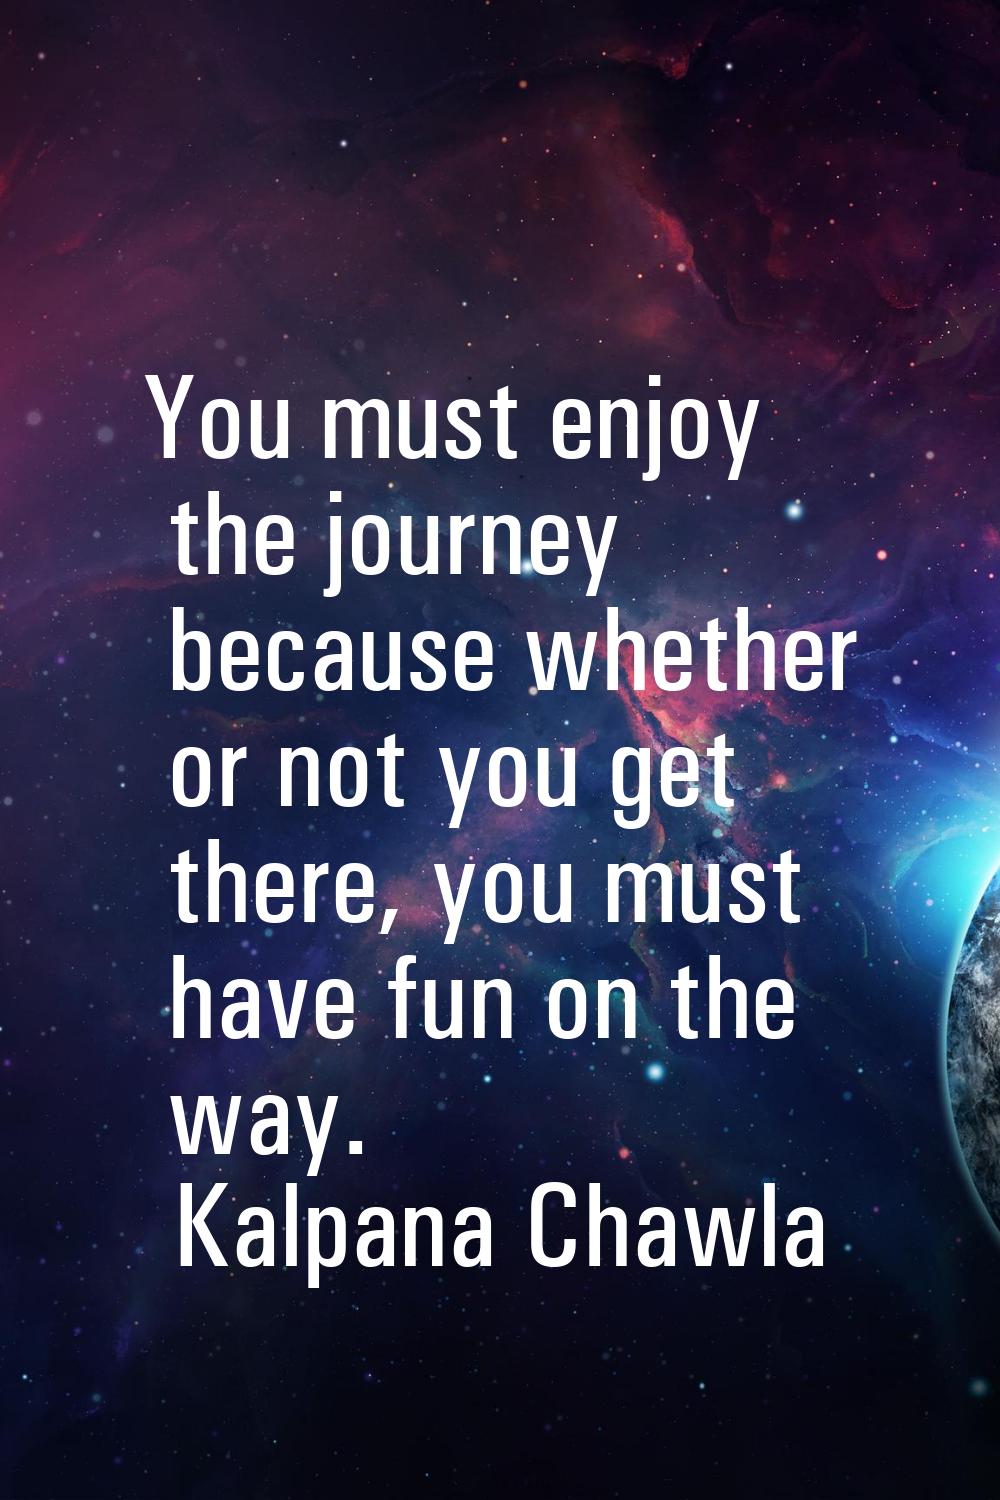 You must enjoy the journey because whether or not you get there, you must have fun on the way.